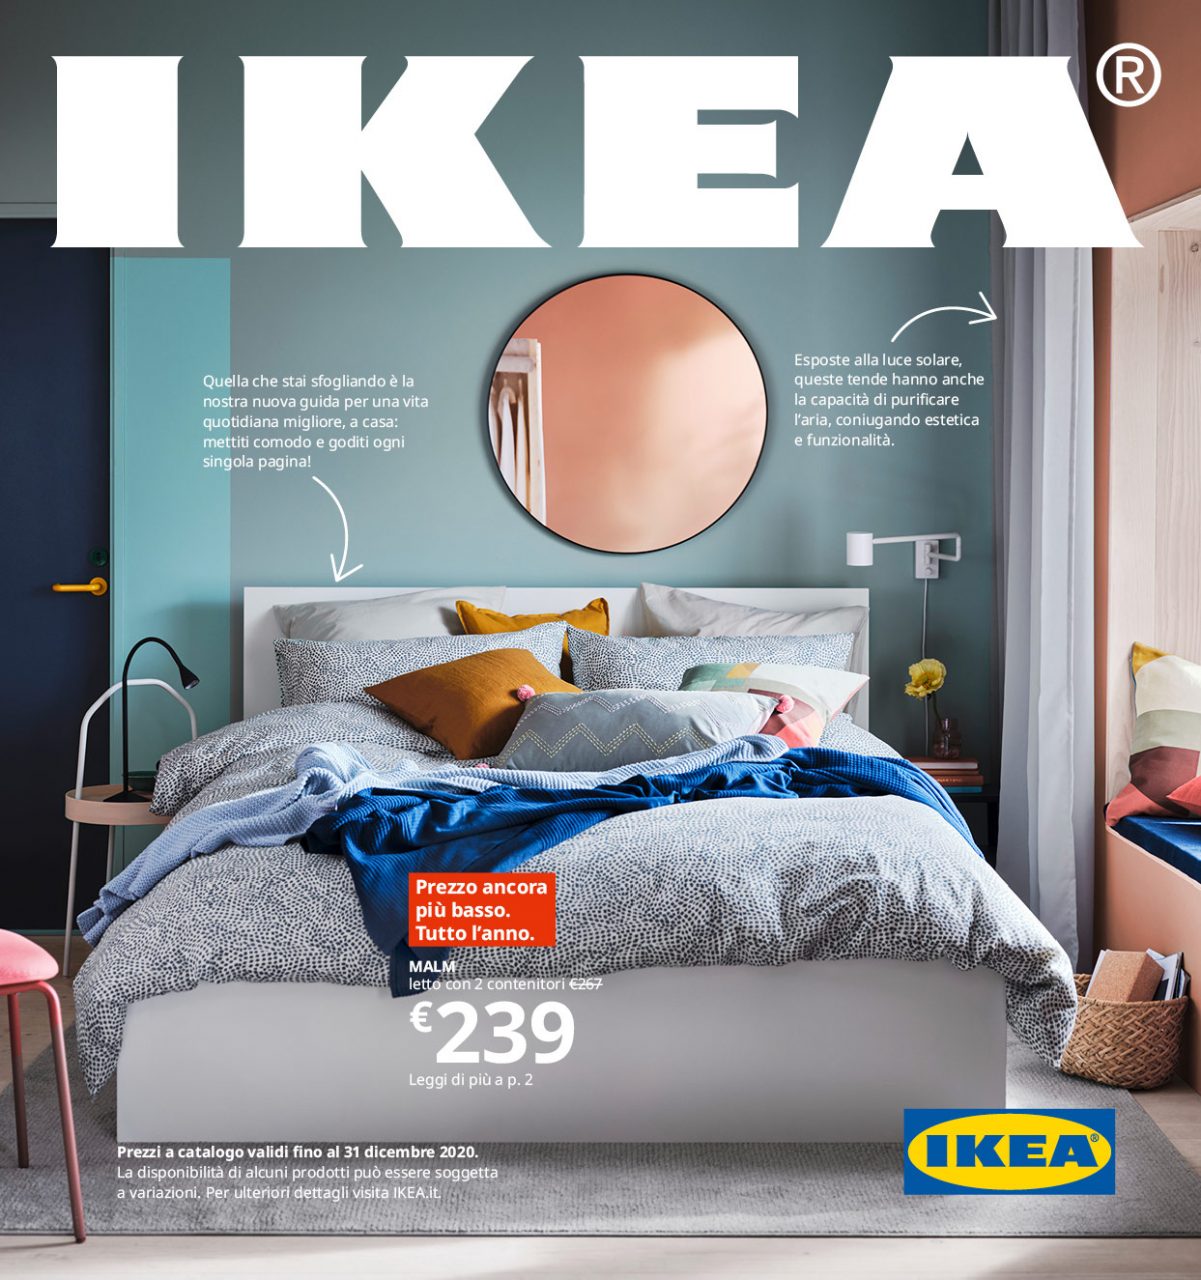 IKEA catalogue cover 2021 with image of bedroom and IKEA logo.